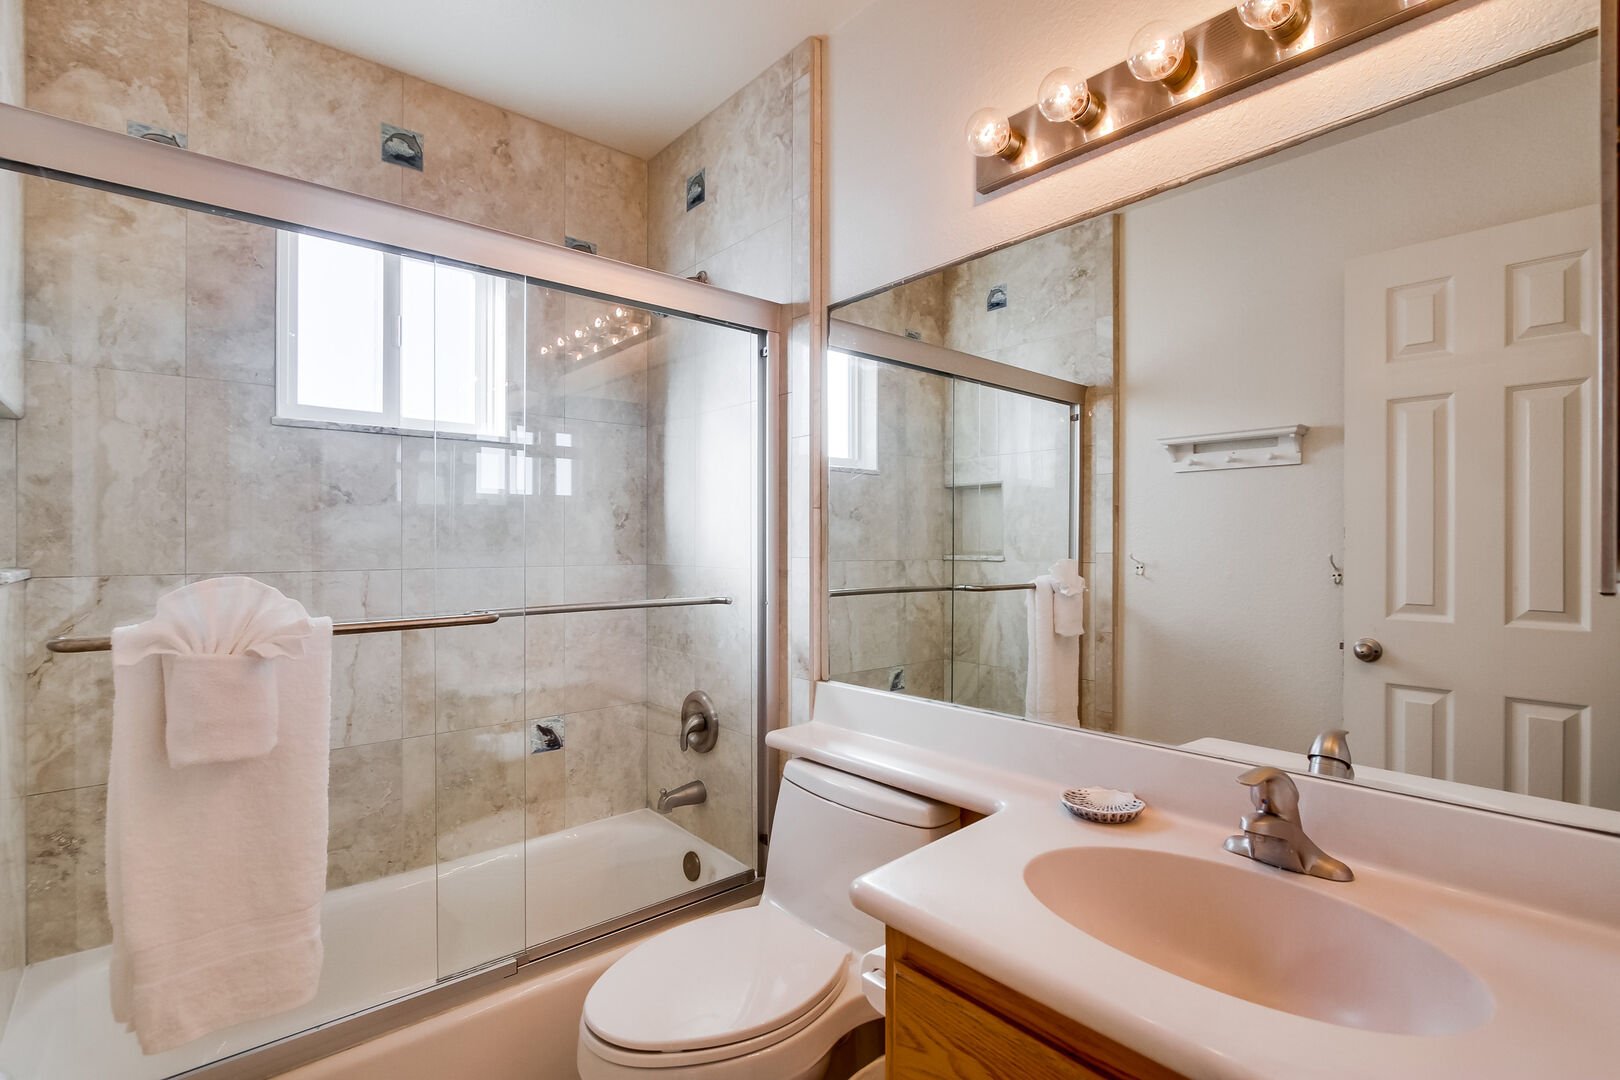 Bathroom with vanity sink, mirror, toilet and shower/ tub combination